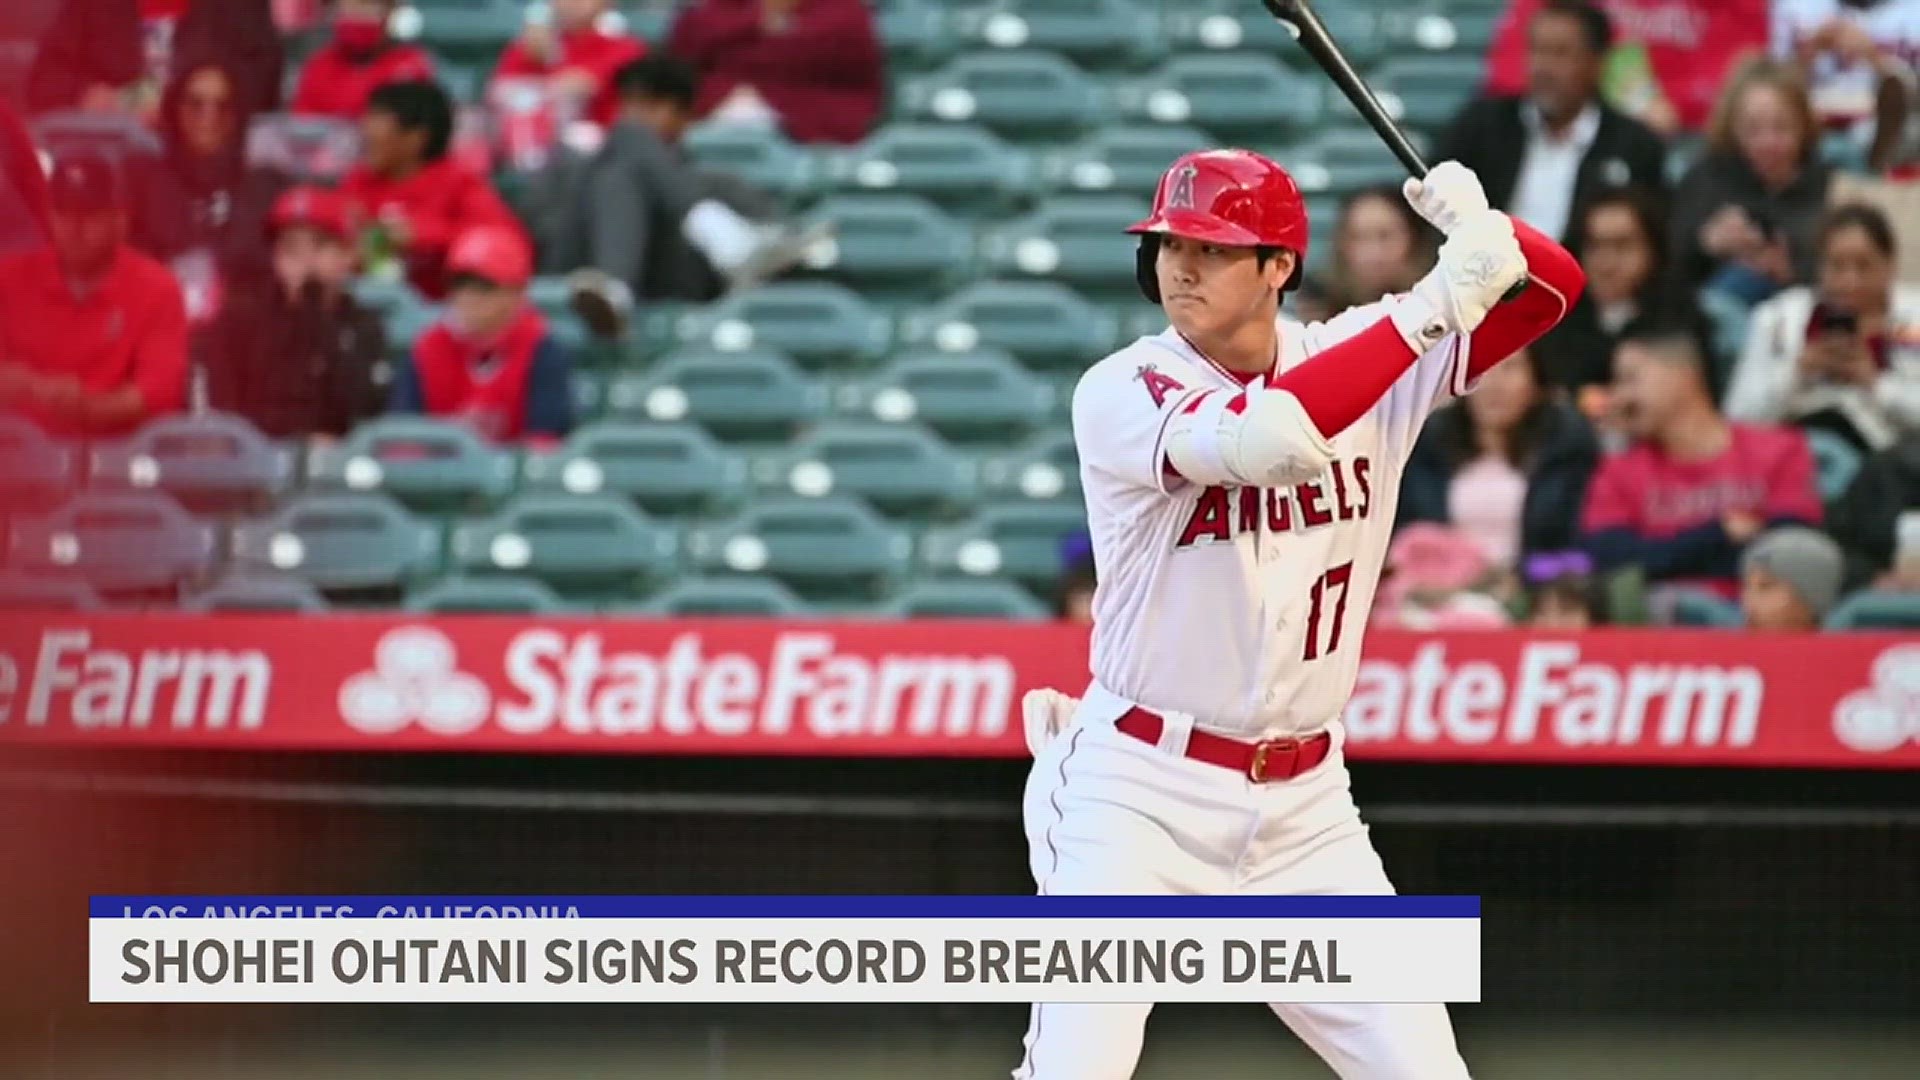 Ohtani signed the 10-year, $700 million deal, the largest in baseball history by more than $250 million. Some are calling him the "modern Babe Ruth."